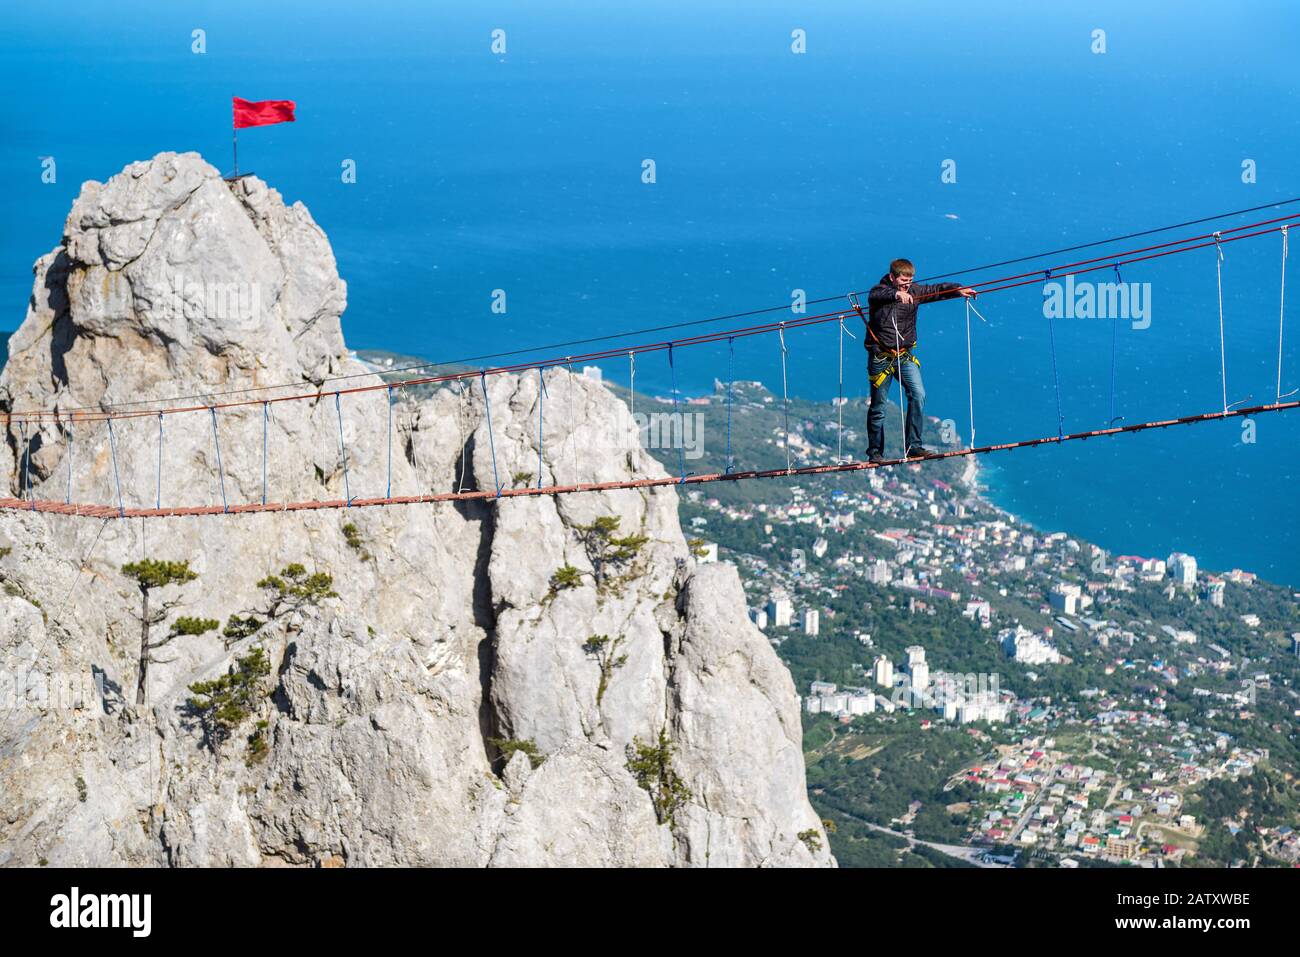 CRIMEA, RUSSIA - MAY 19, 2016: Tourist walking on rope bridge on the Mount Ai-Petri. It is one of the highest mountains in the Crimea and tourist attr Stock Photo